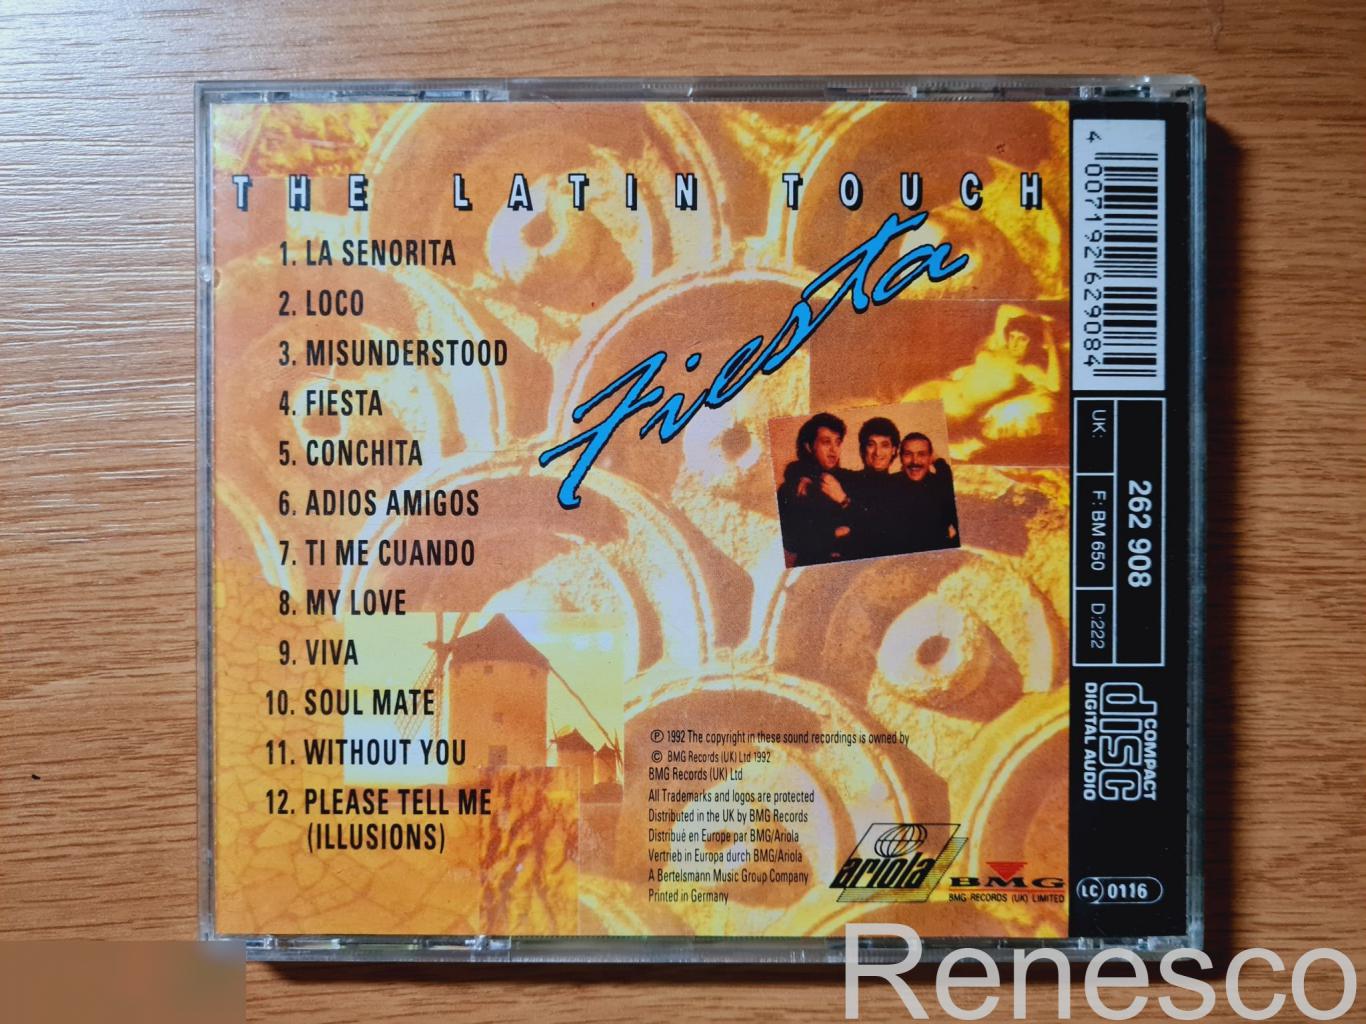 The Latin Touch – Fiesta (Germany) (1992) 1